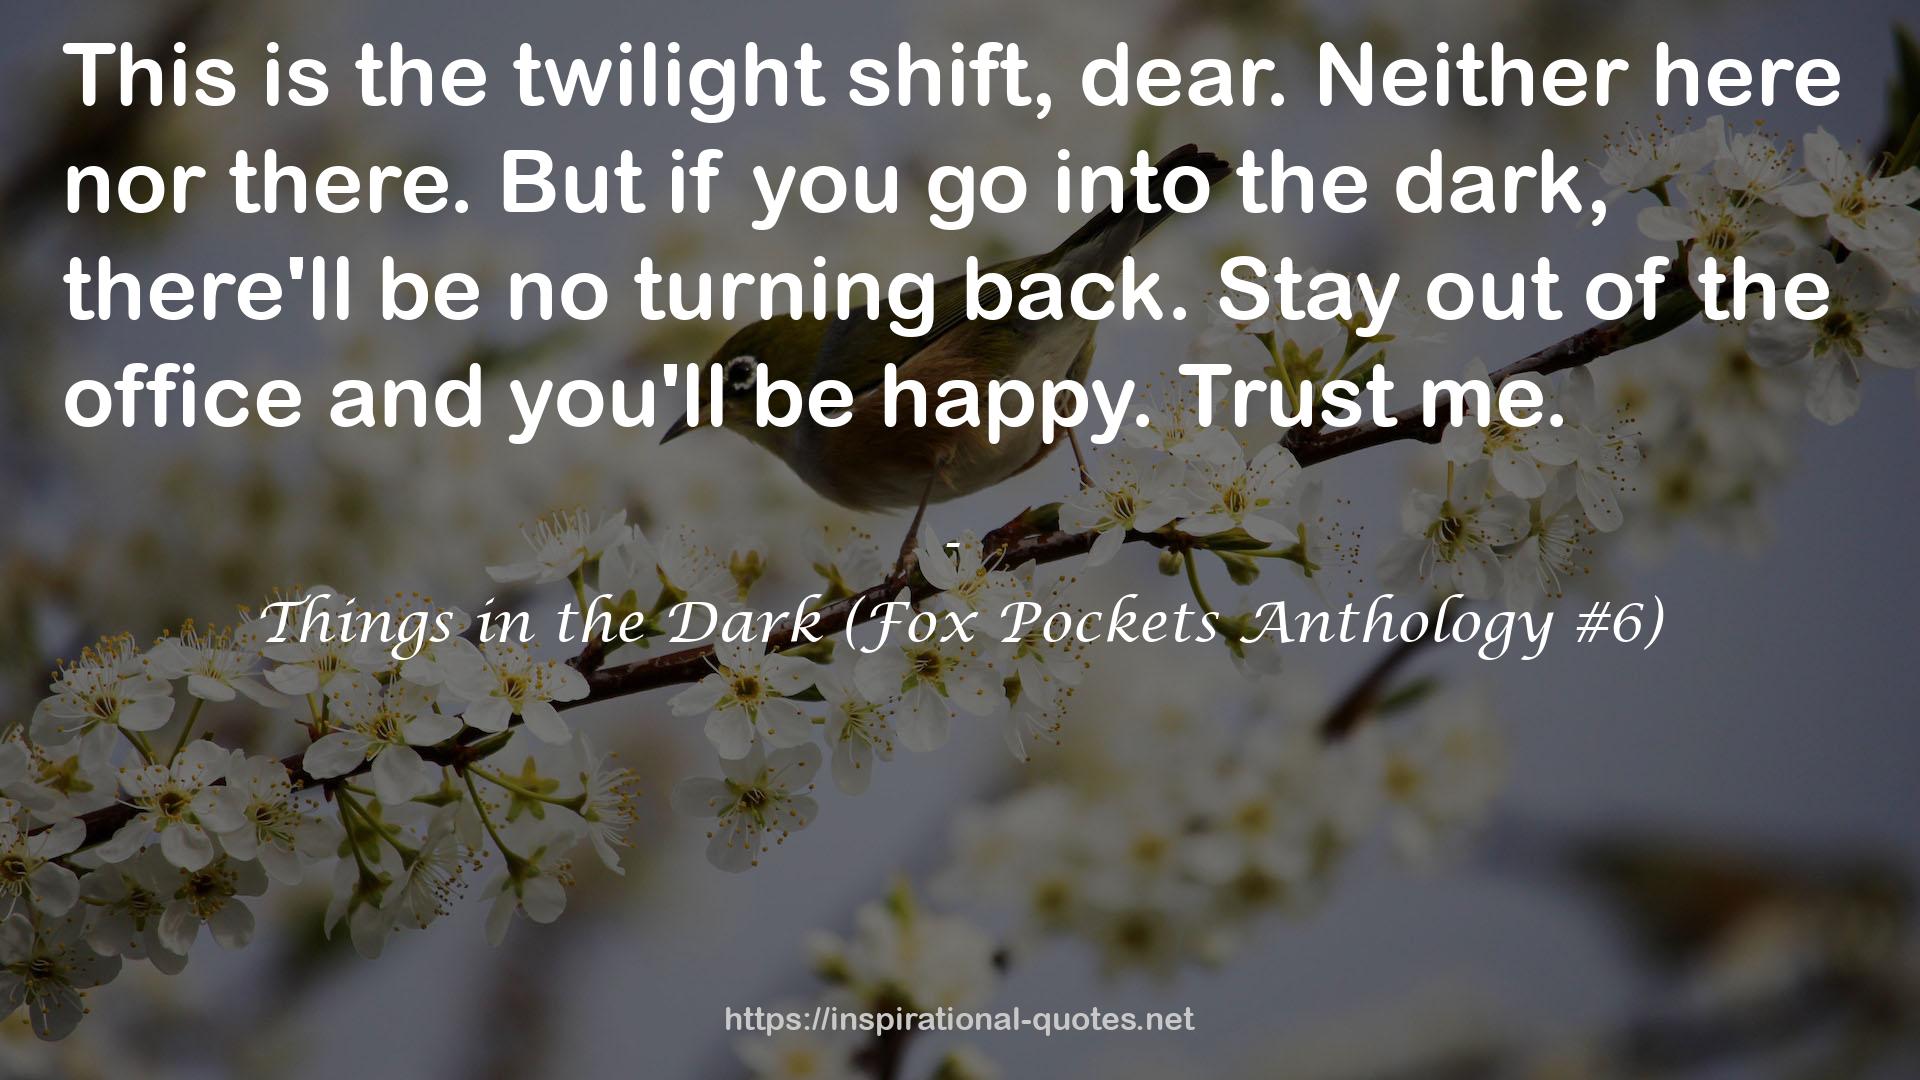 Things in the Dark (Fox Pockets Anthology #6) QUOTES